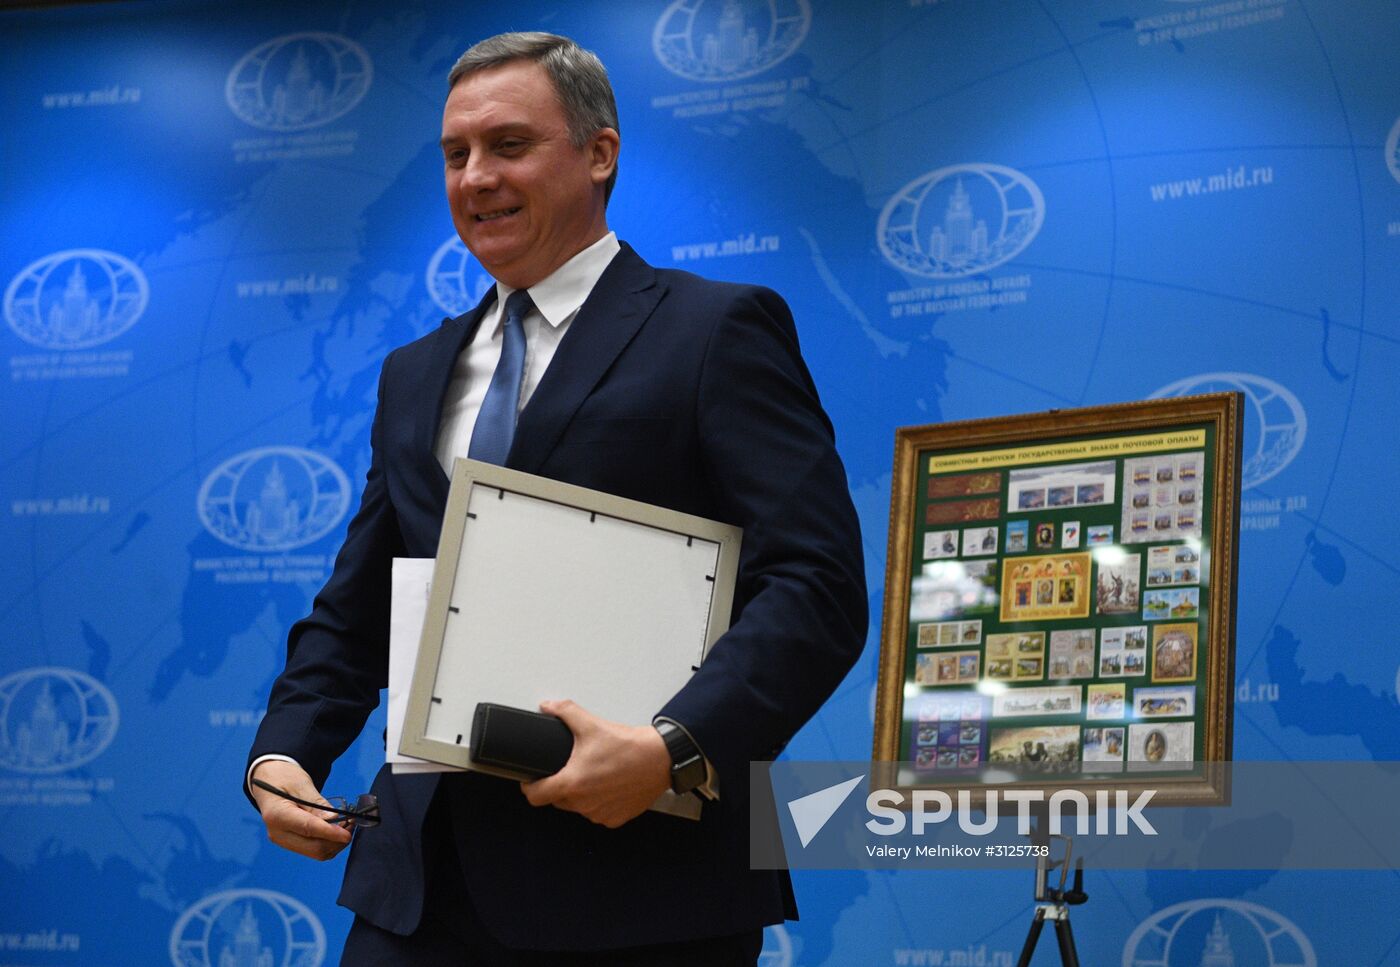 Envelope cancellation ceremony marking 25th anniversary of Russia-Belarus diplomatic relations